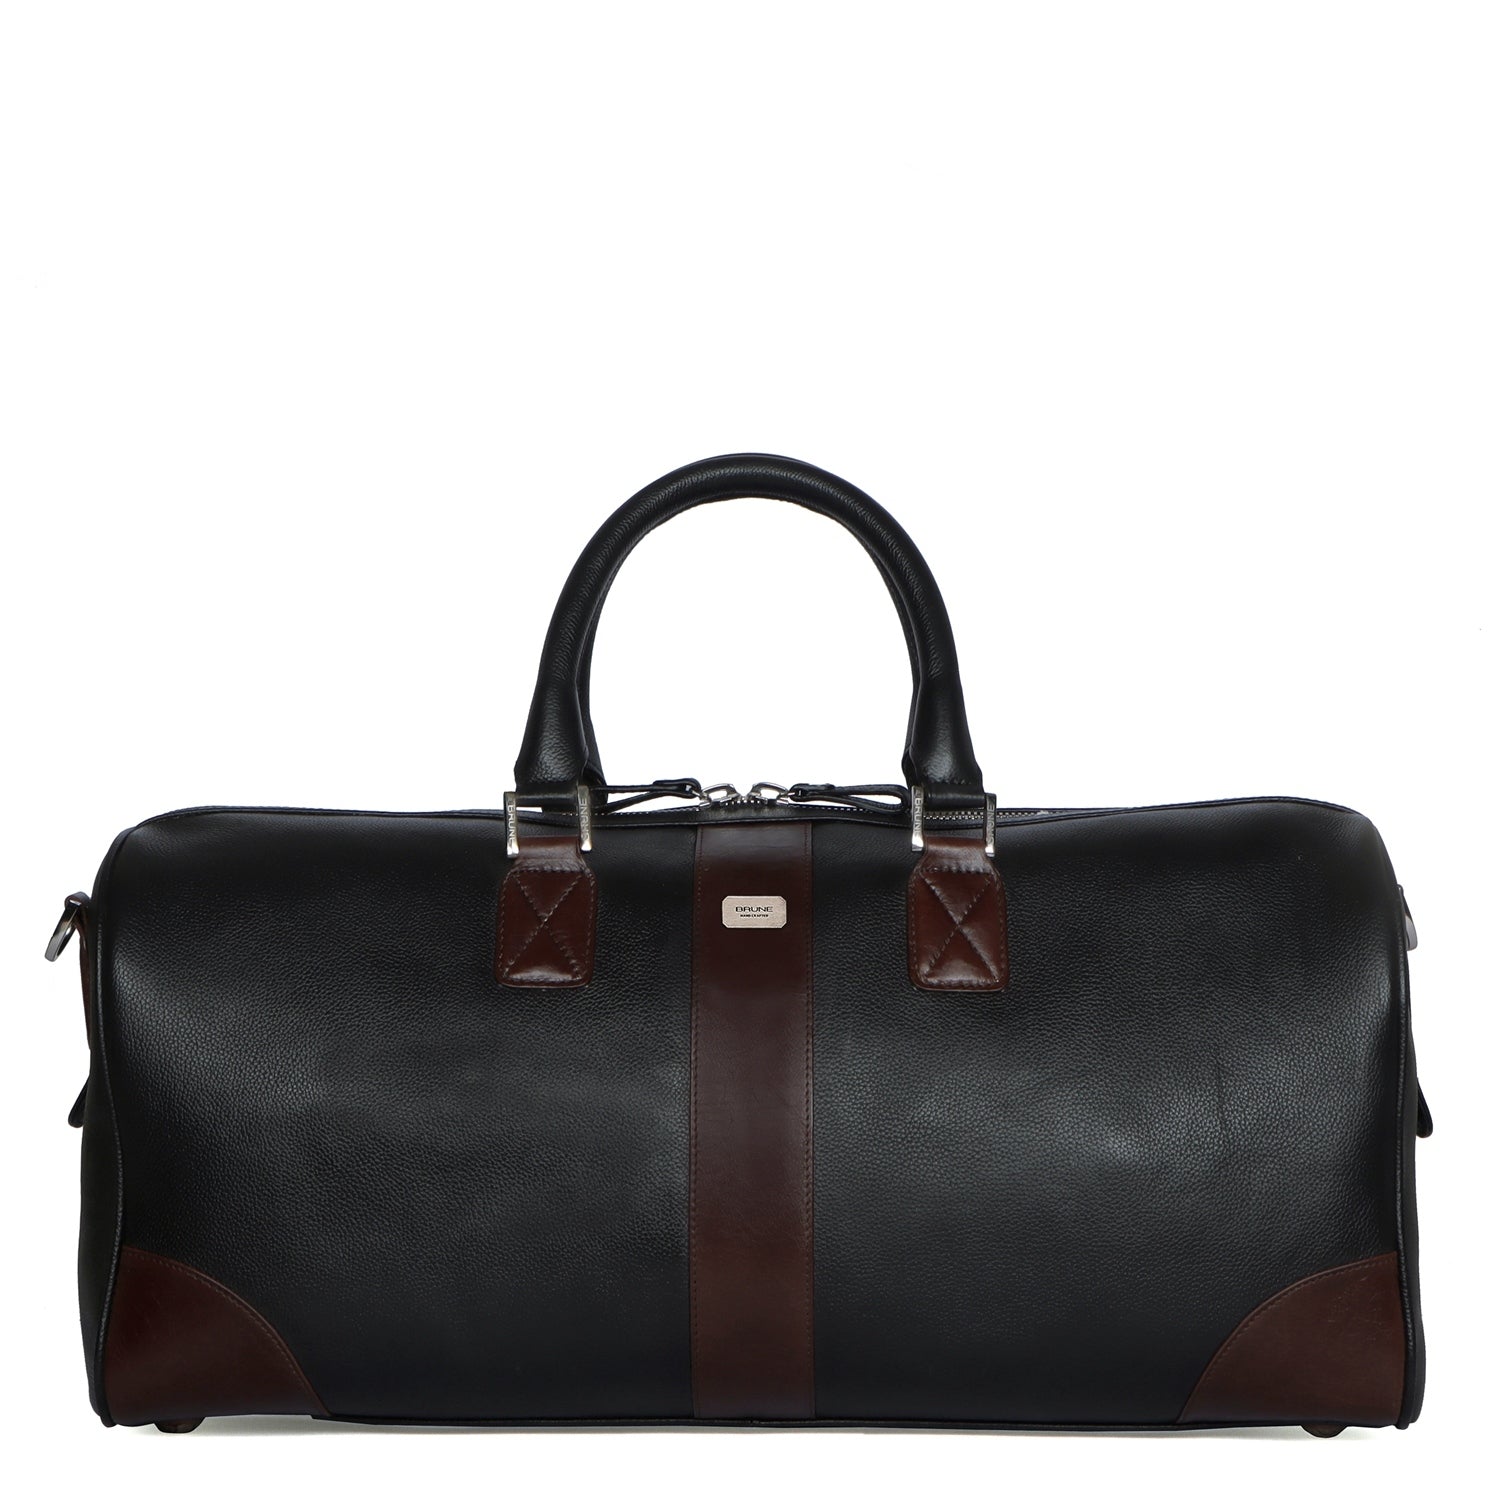 Contrasting Dark Brown Trims Black Textured Leather Duffle Bag With Re